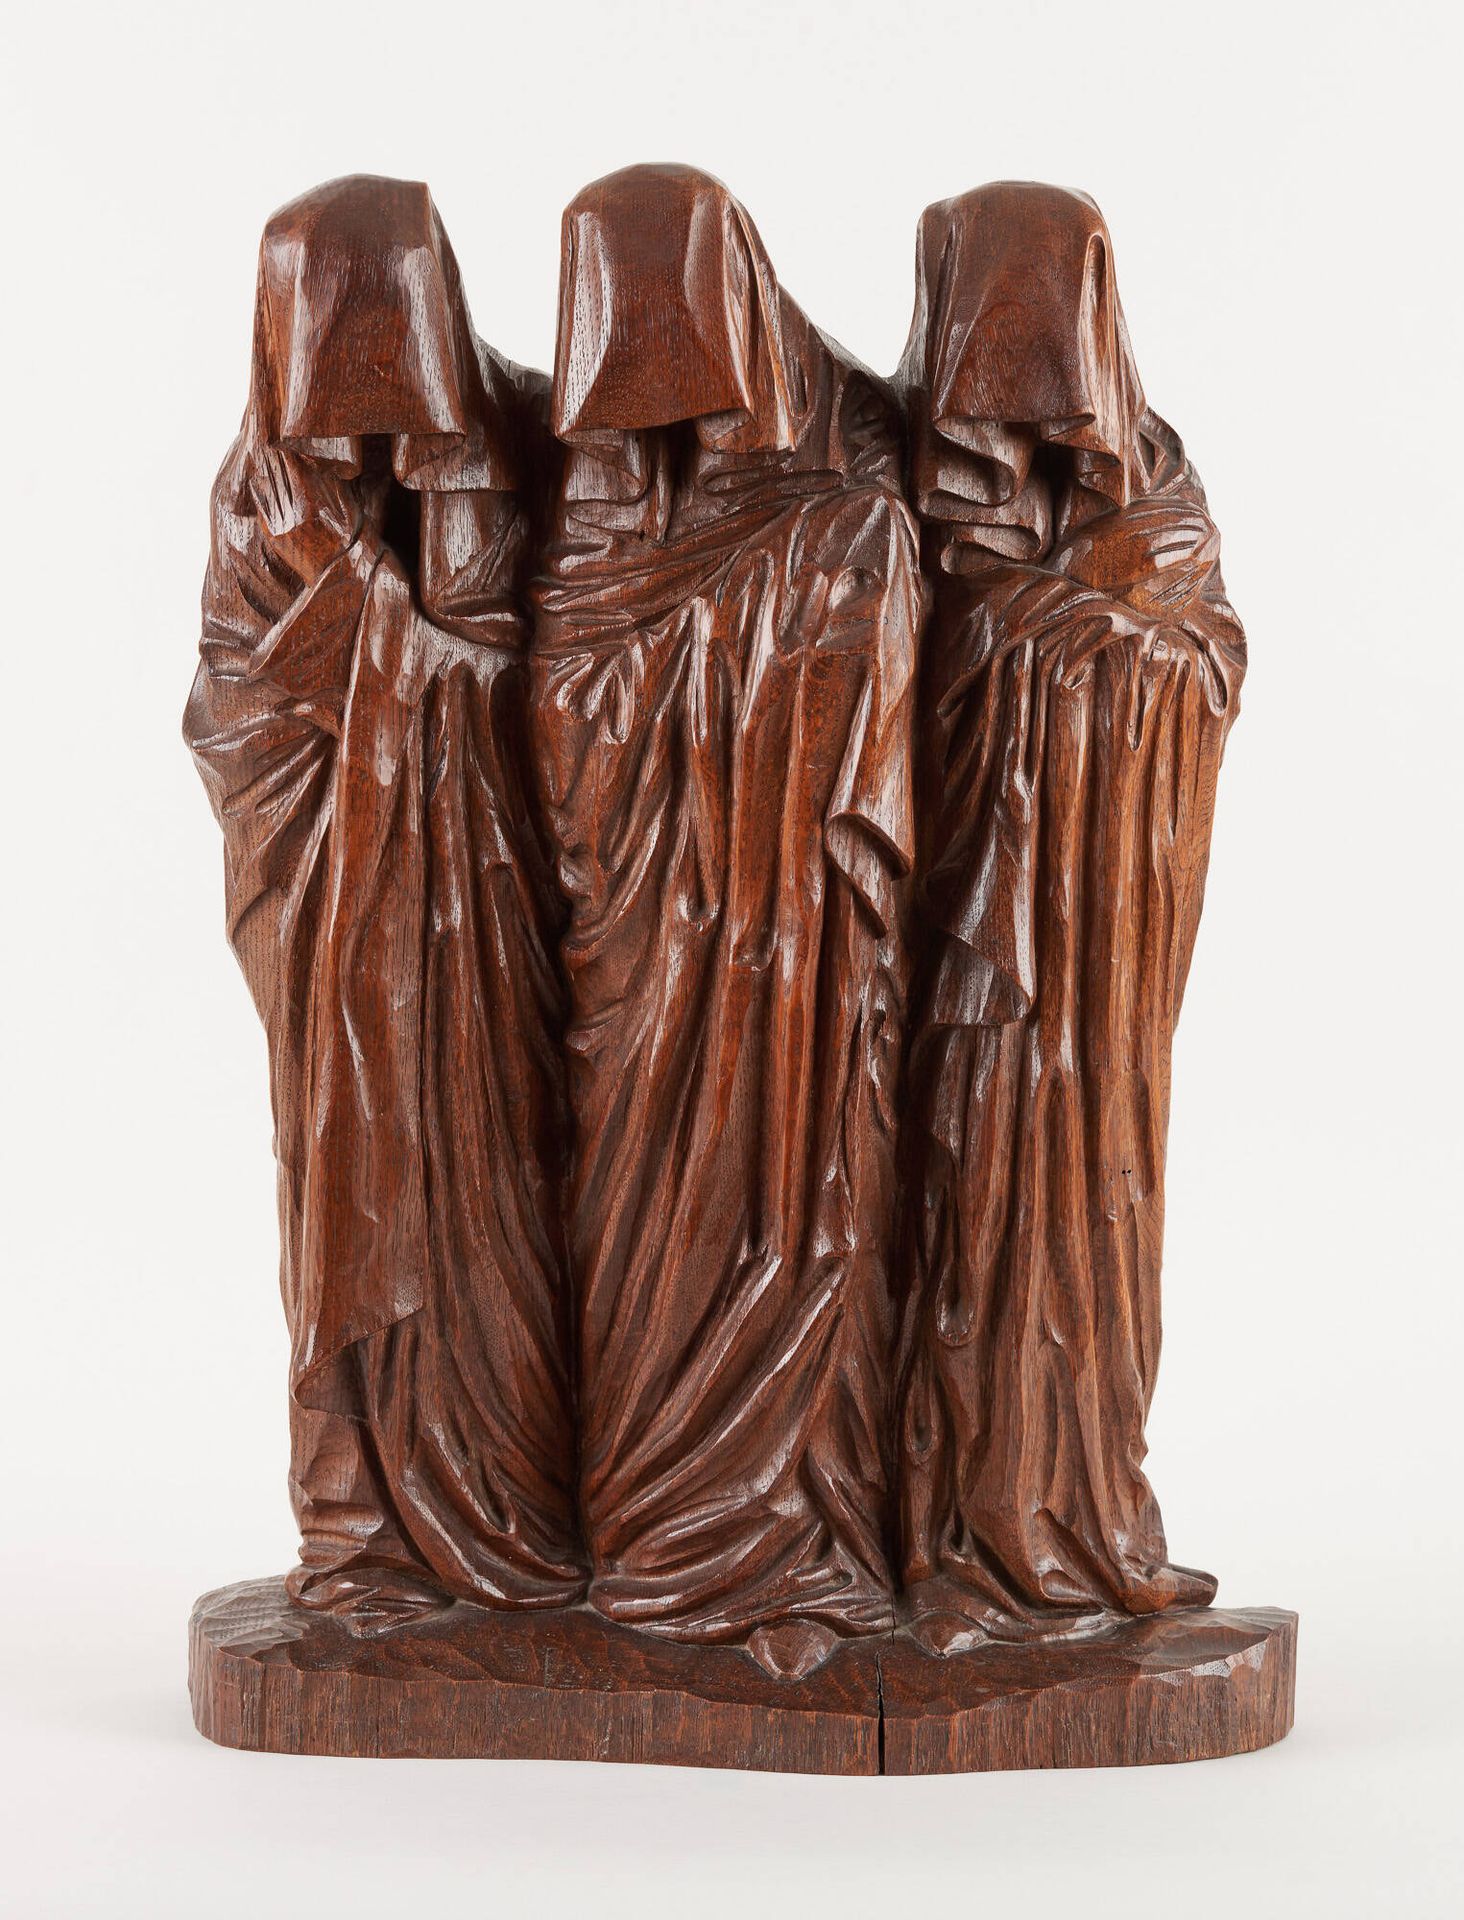 George MINNE École belge (1866-1941). Wood sculpture: "The three holy women".
By&hellip;